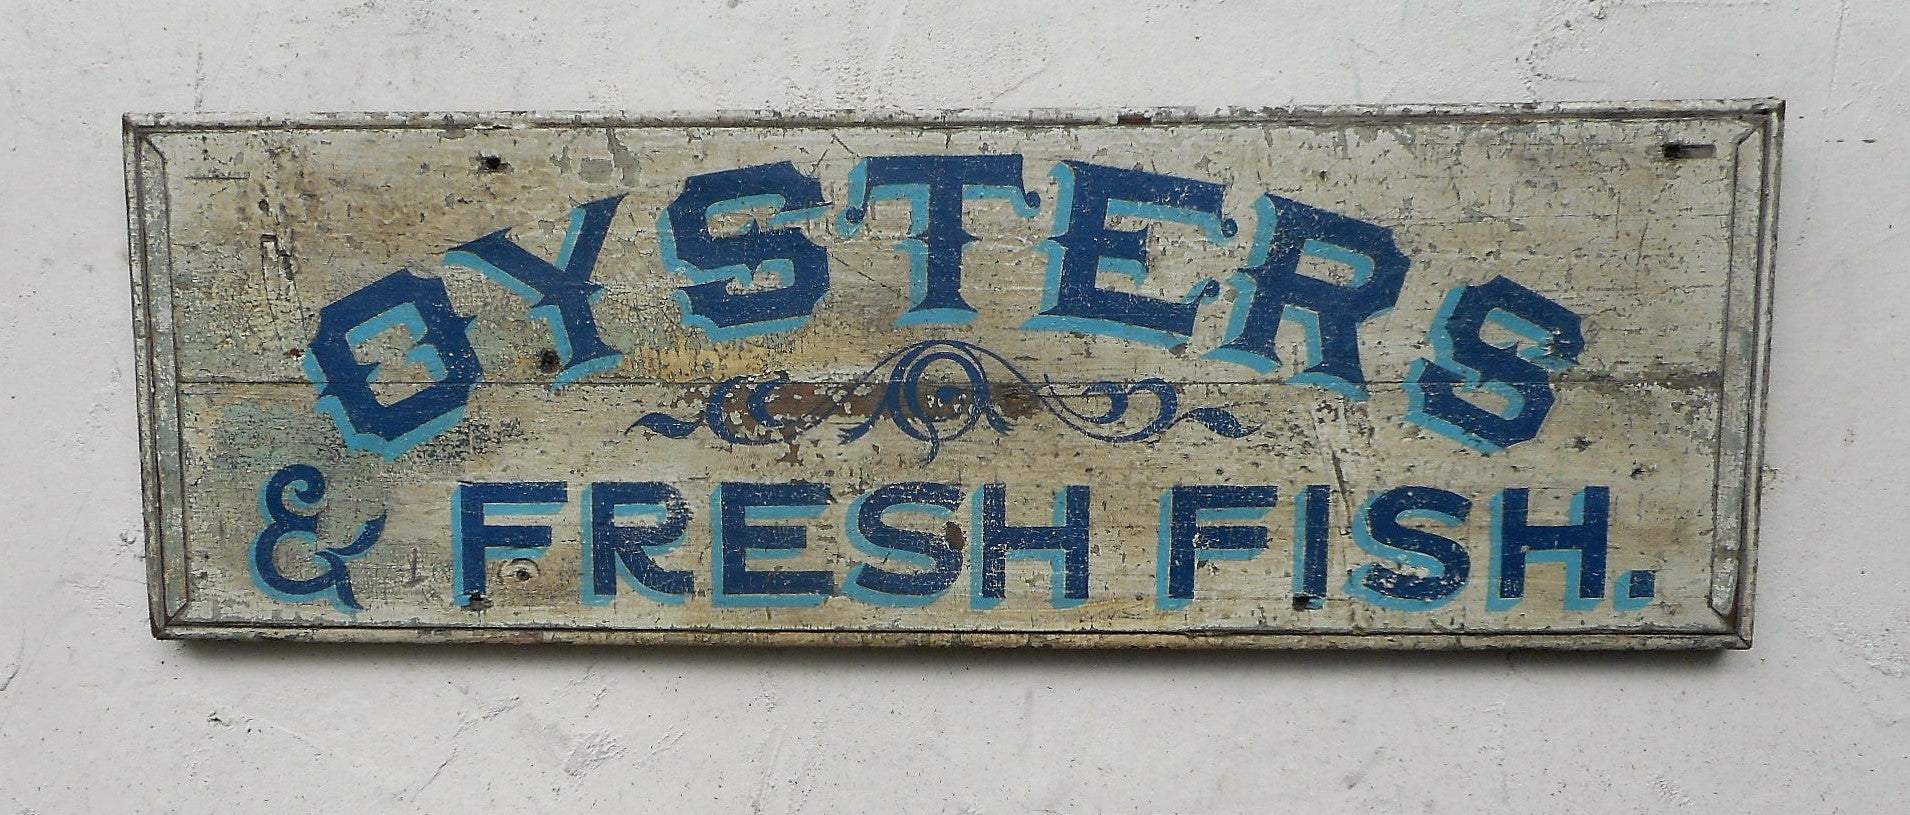 Oysters and Fresh Fish